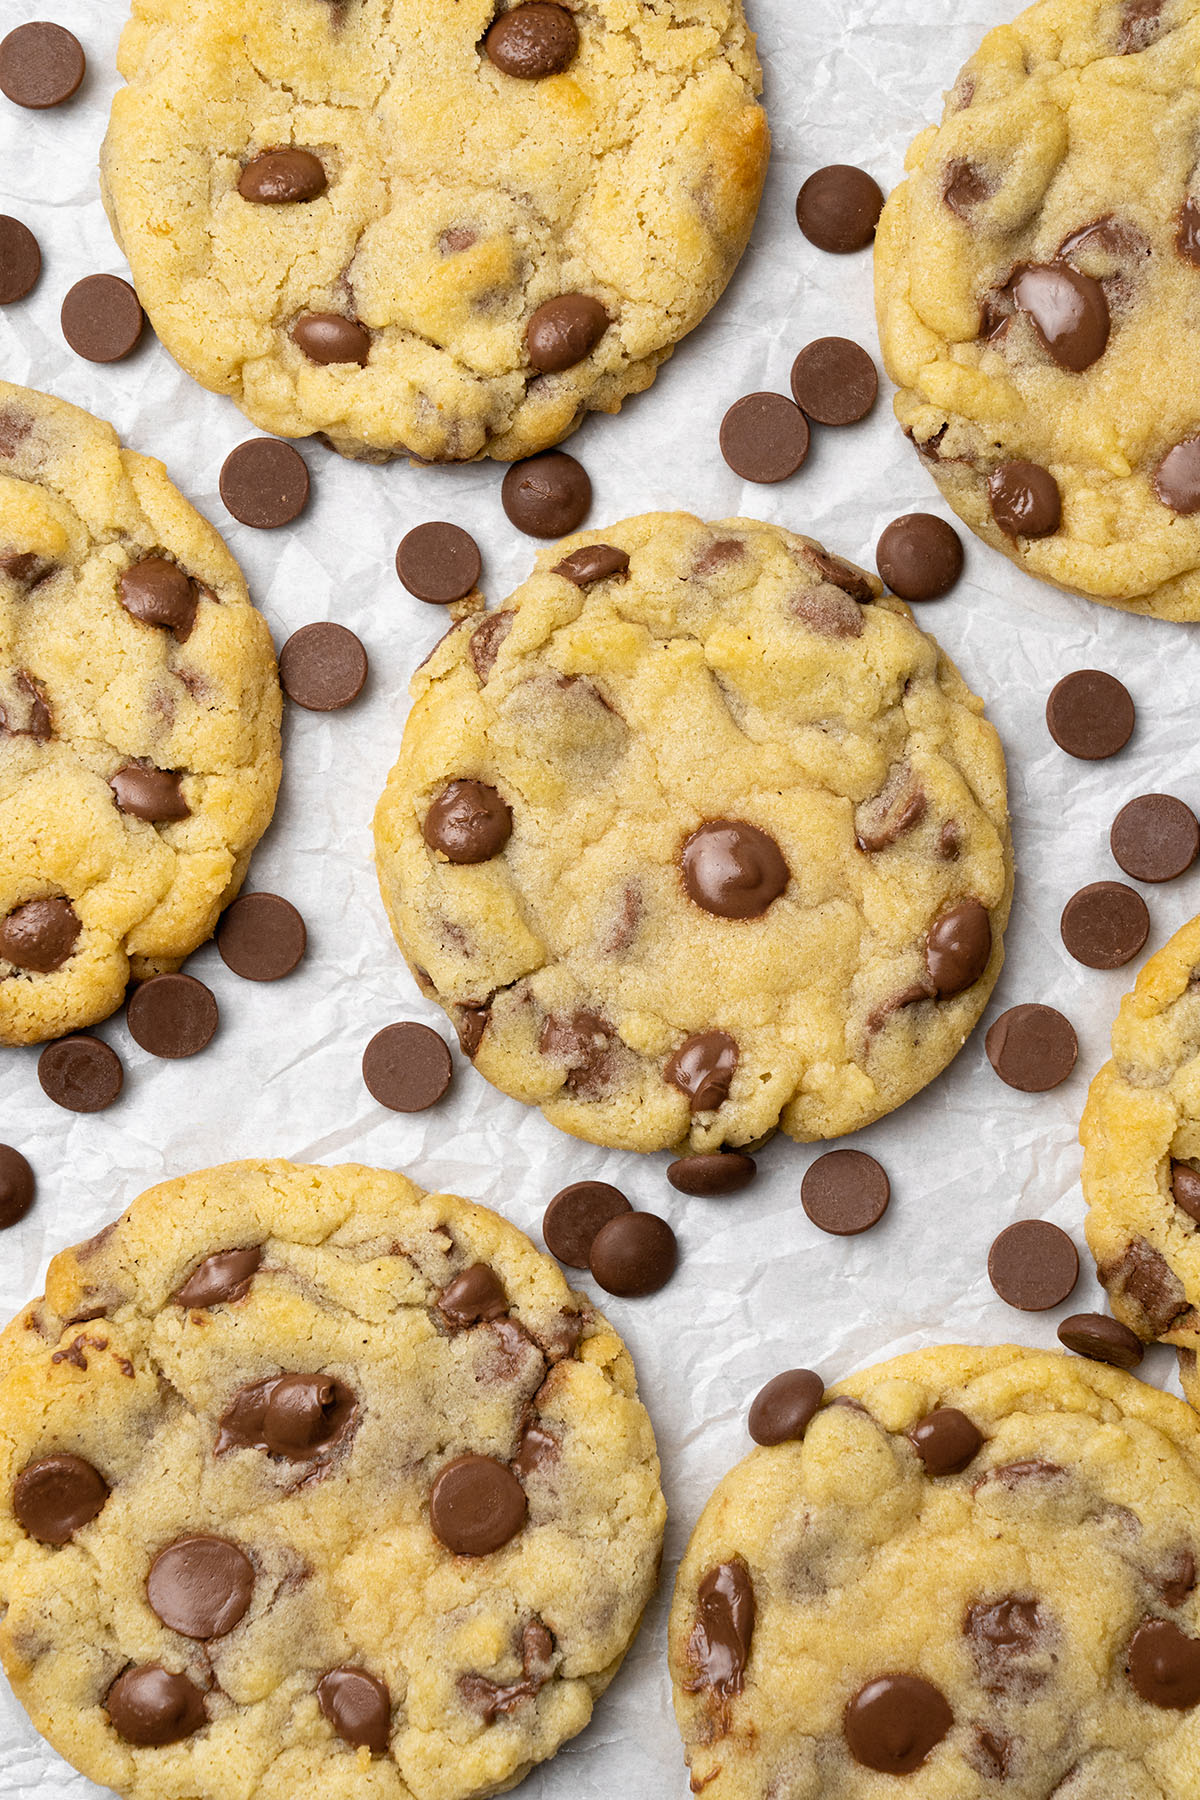 Chocolate chip cookies without brown sugar.